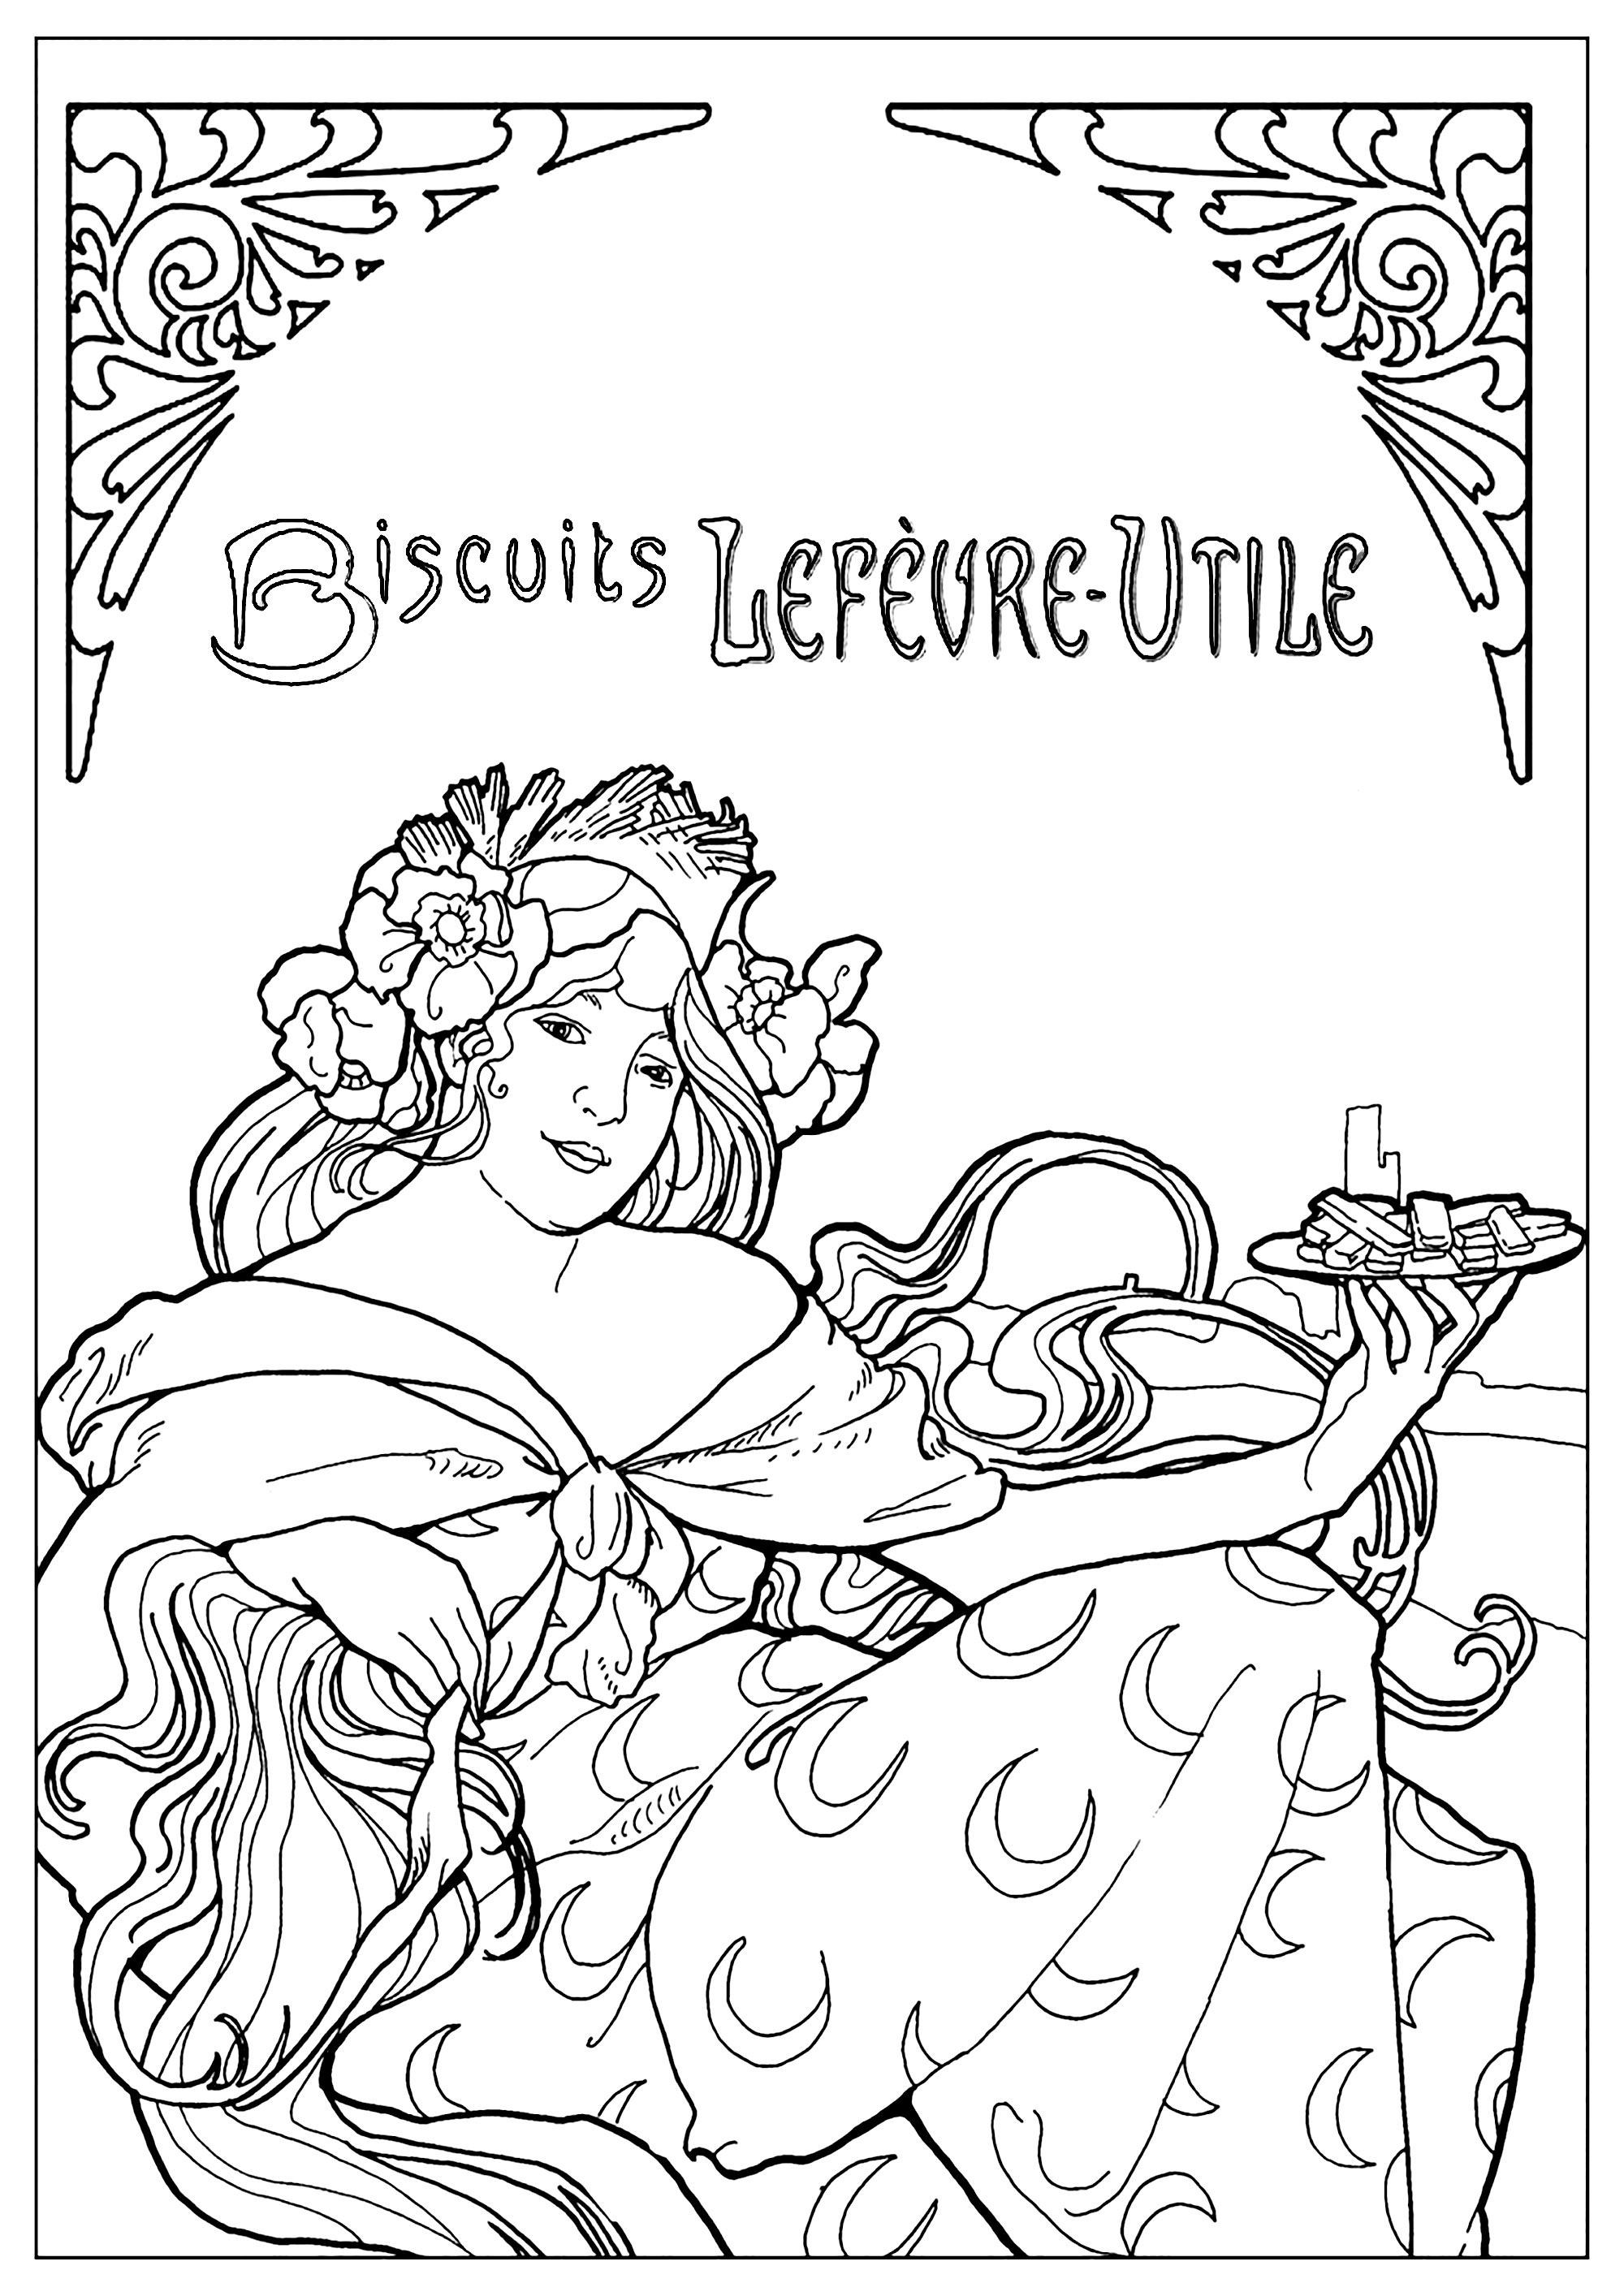 Coloring page created from a french advertising poster for Biscuits Lefèvre-Utile (LU) by Alfons Mucha (1896). This poster is typical of the Art Nouveau style. An original copy of this poster is visible at the Carnavalet Museum (Paris History Museum, in Paris)